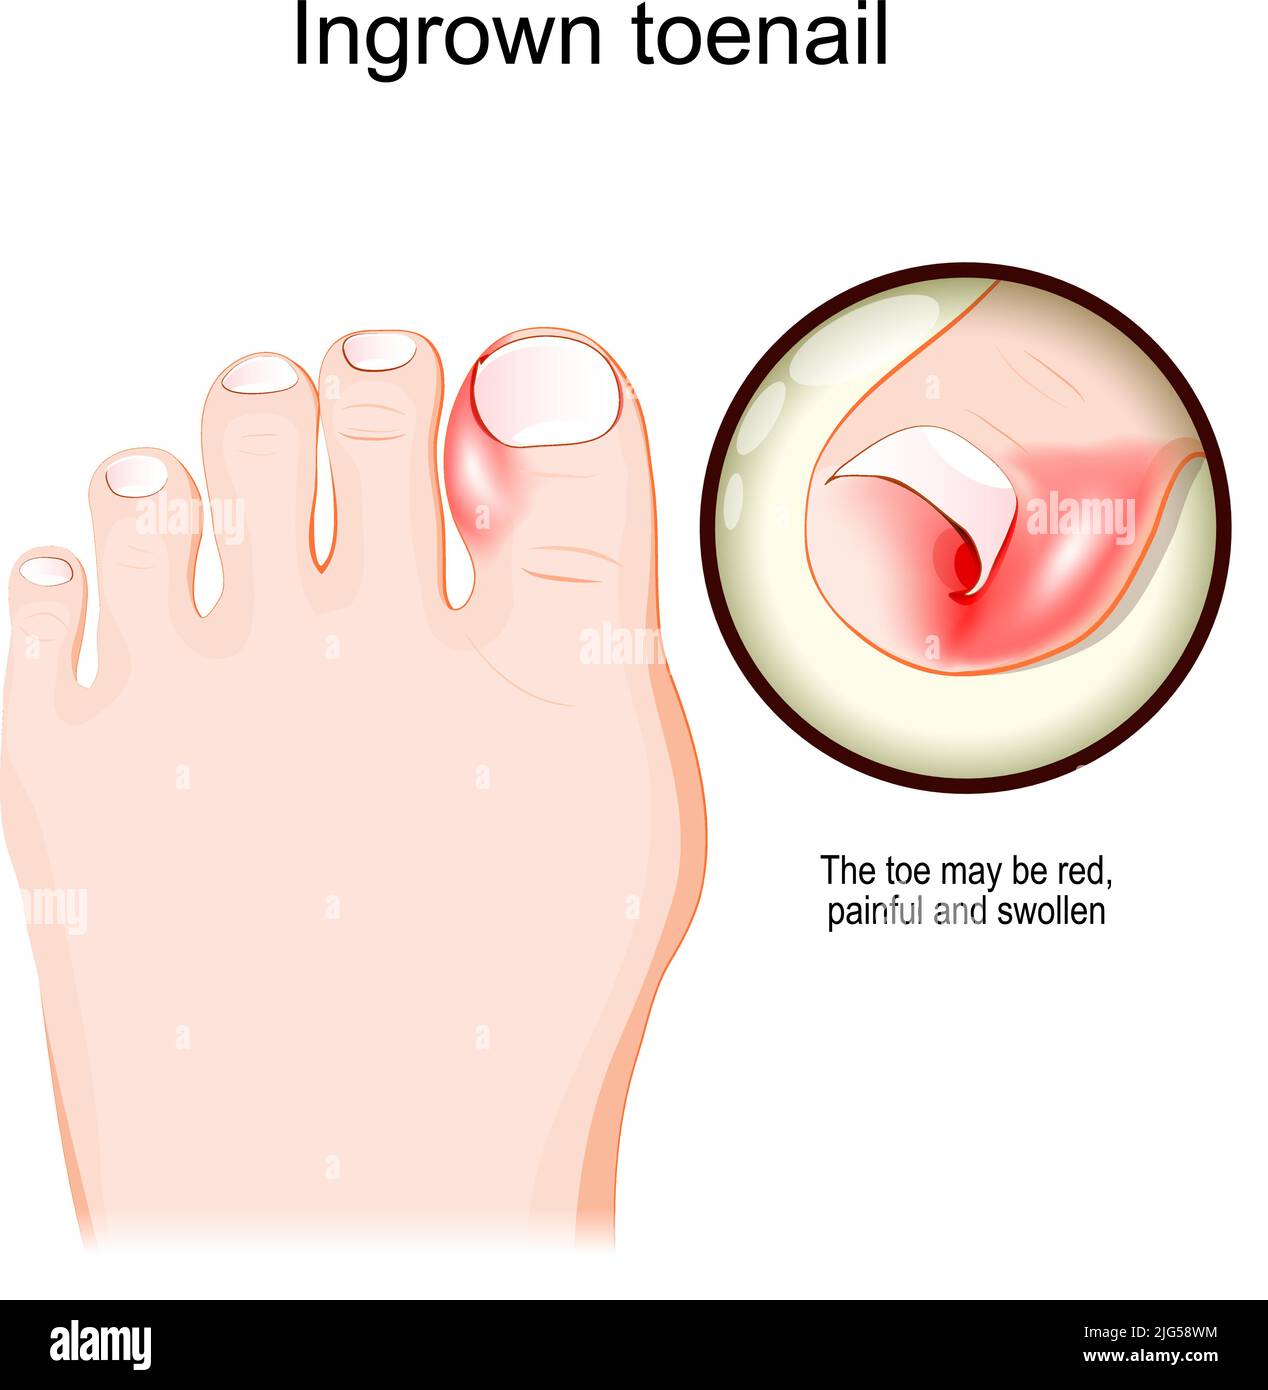 Ingrown toenail. Human foot. Close-up of red, painful and swollen toe. vector illustration Stock Vector